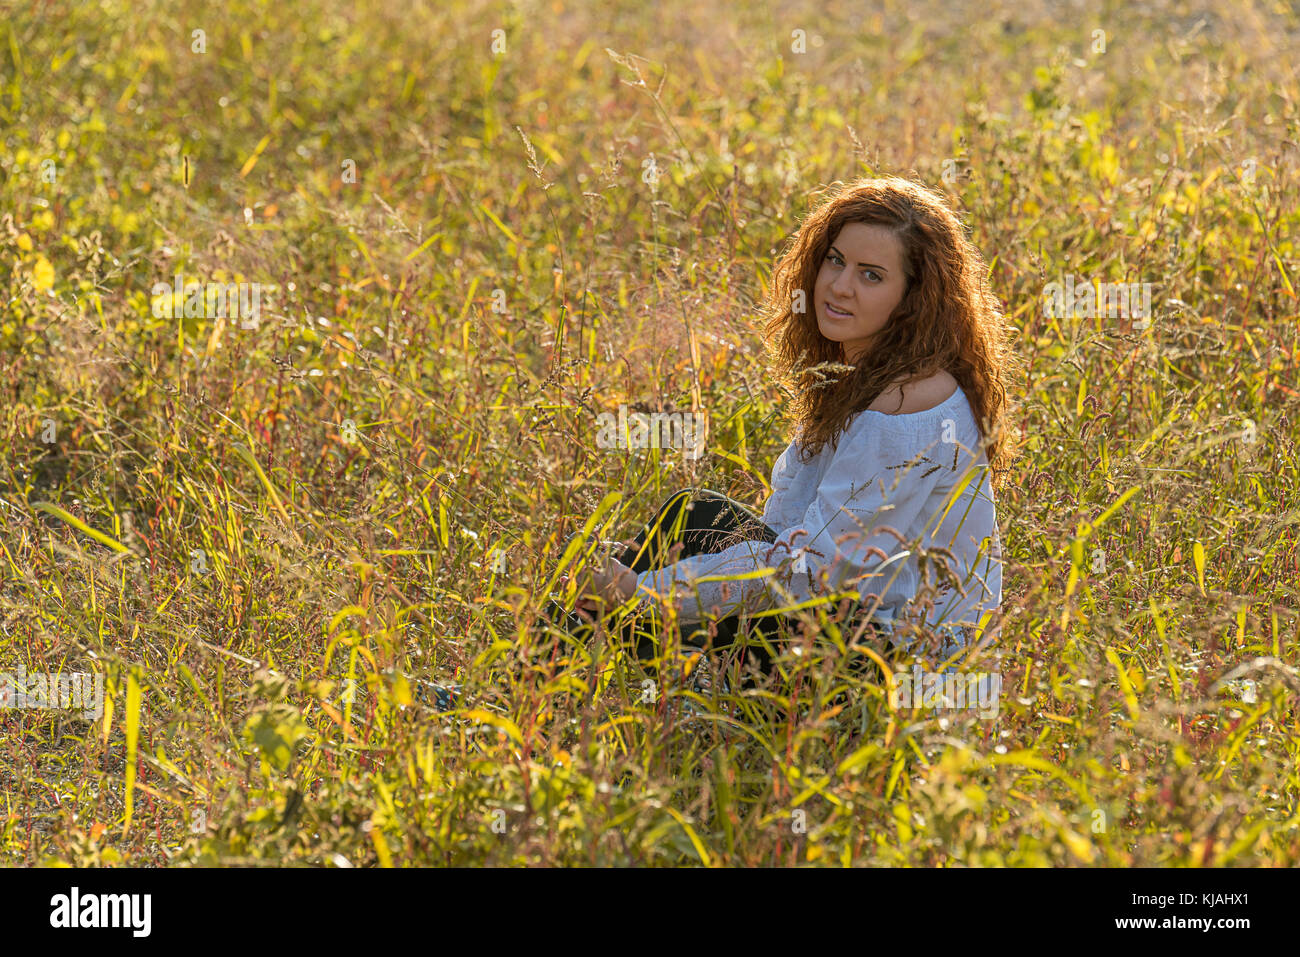 Girl with red hair in the grass Stock Photo - Alamy